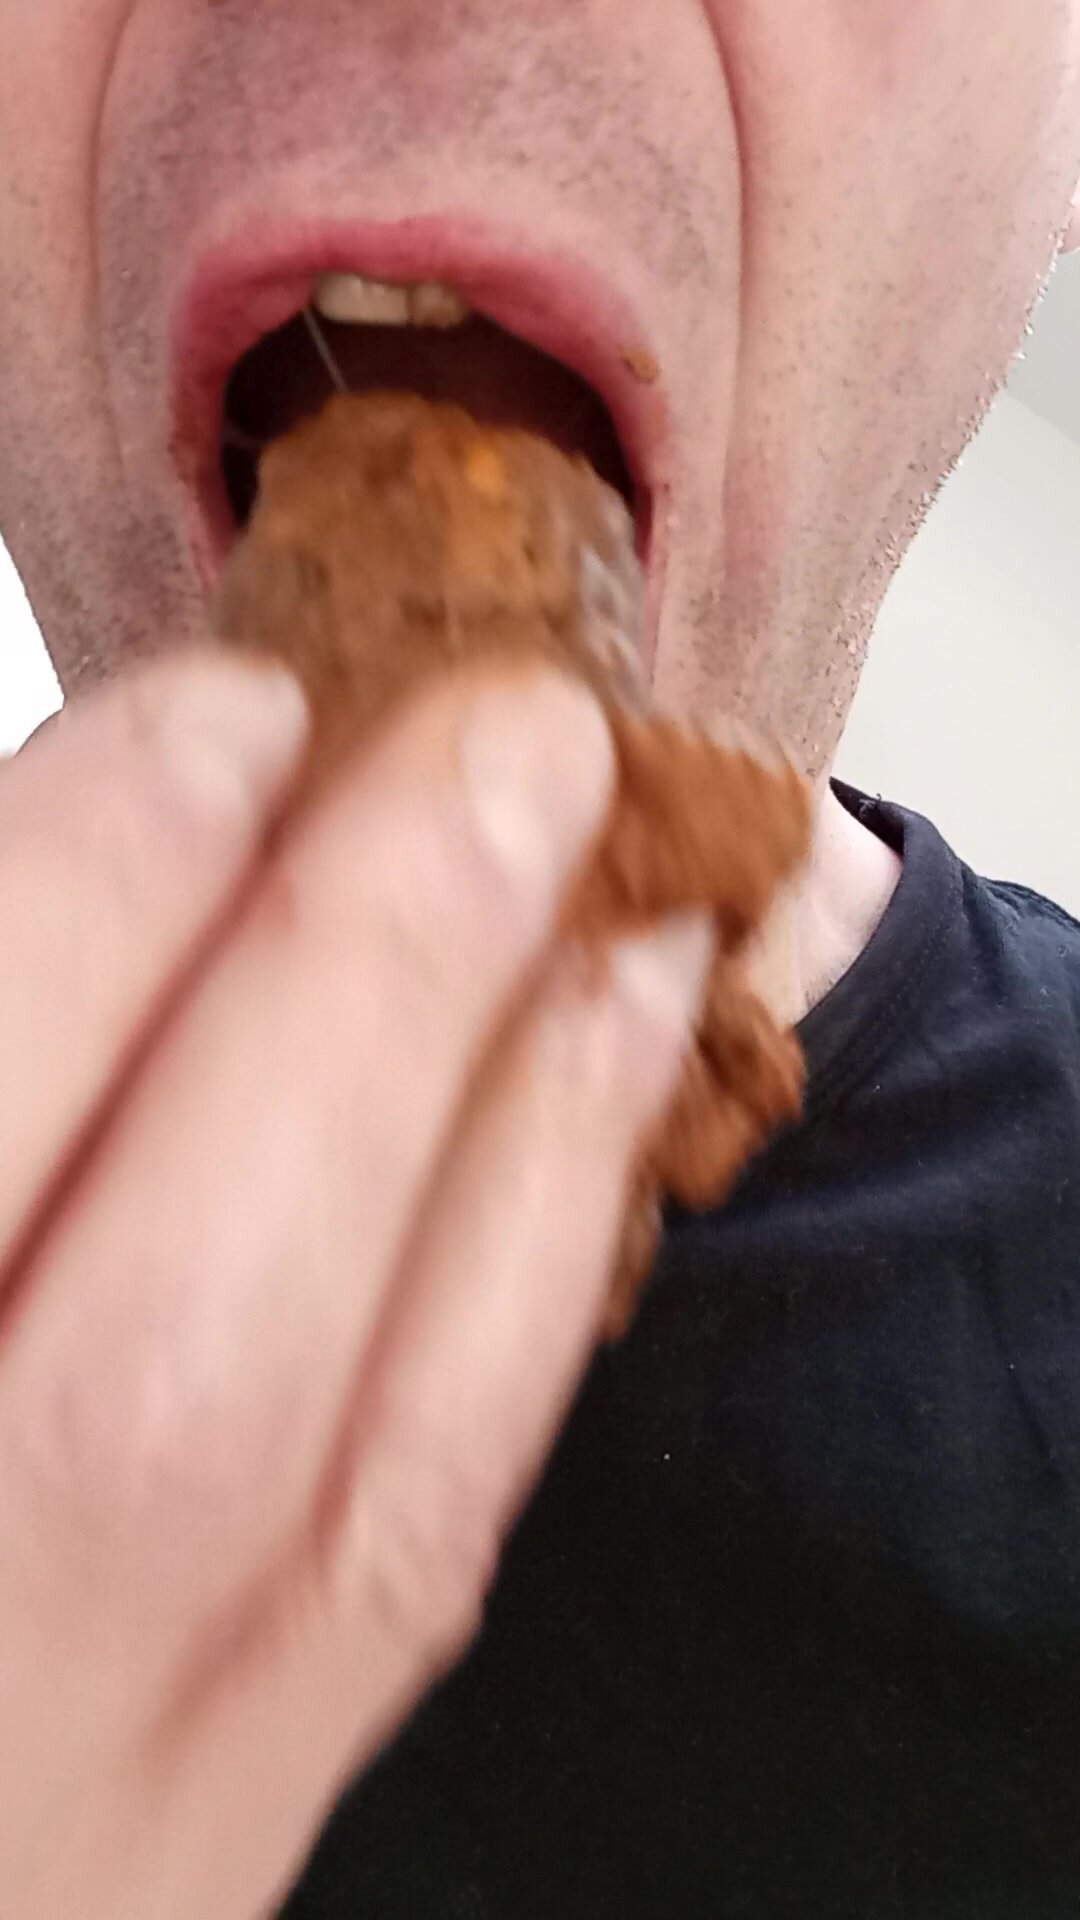 Eating a shit